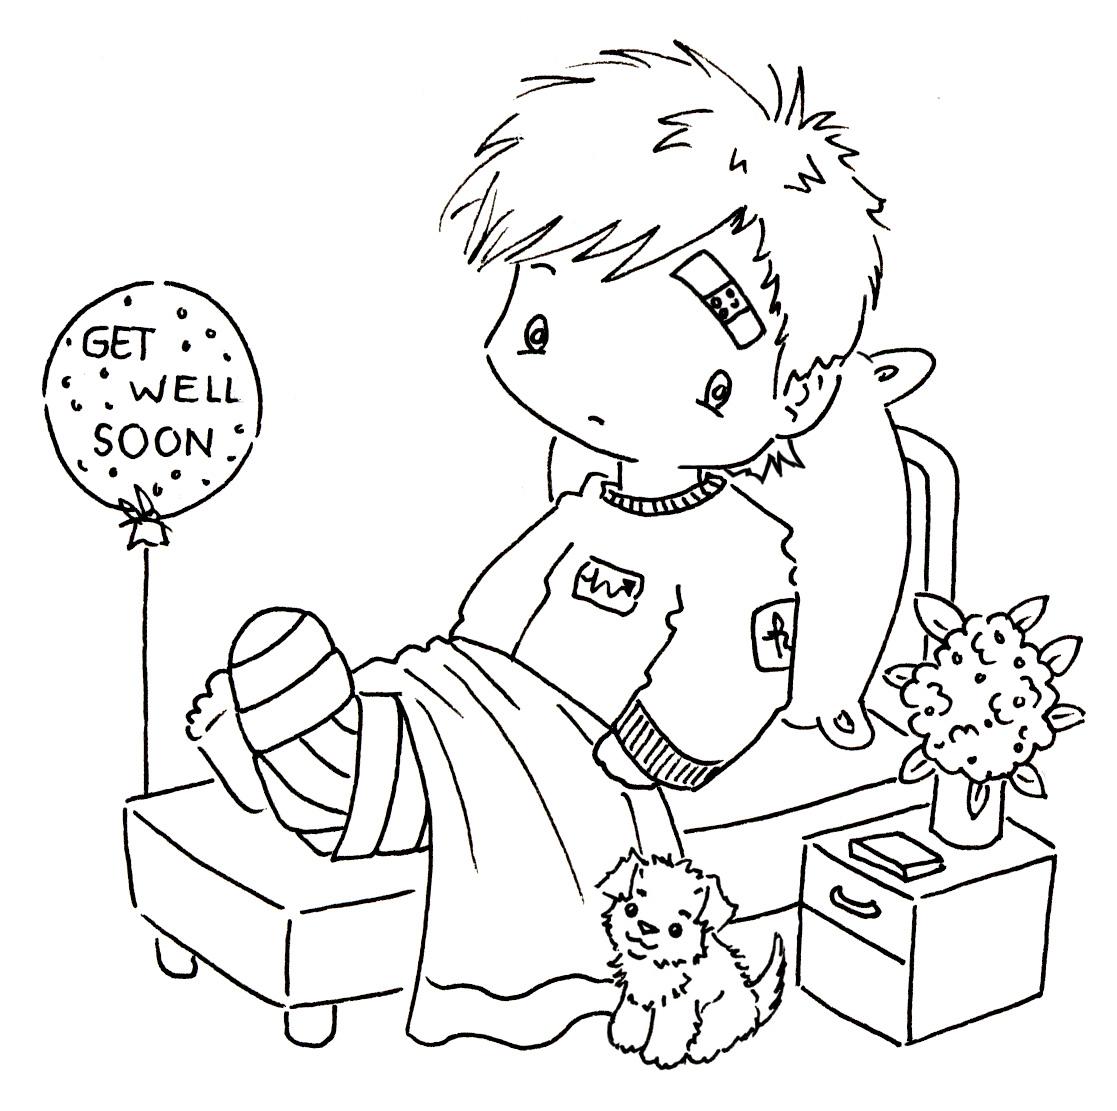 Get Well Card Coloring Page at Free printable